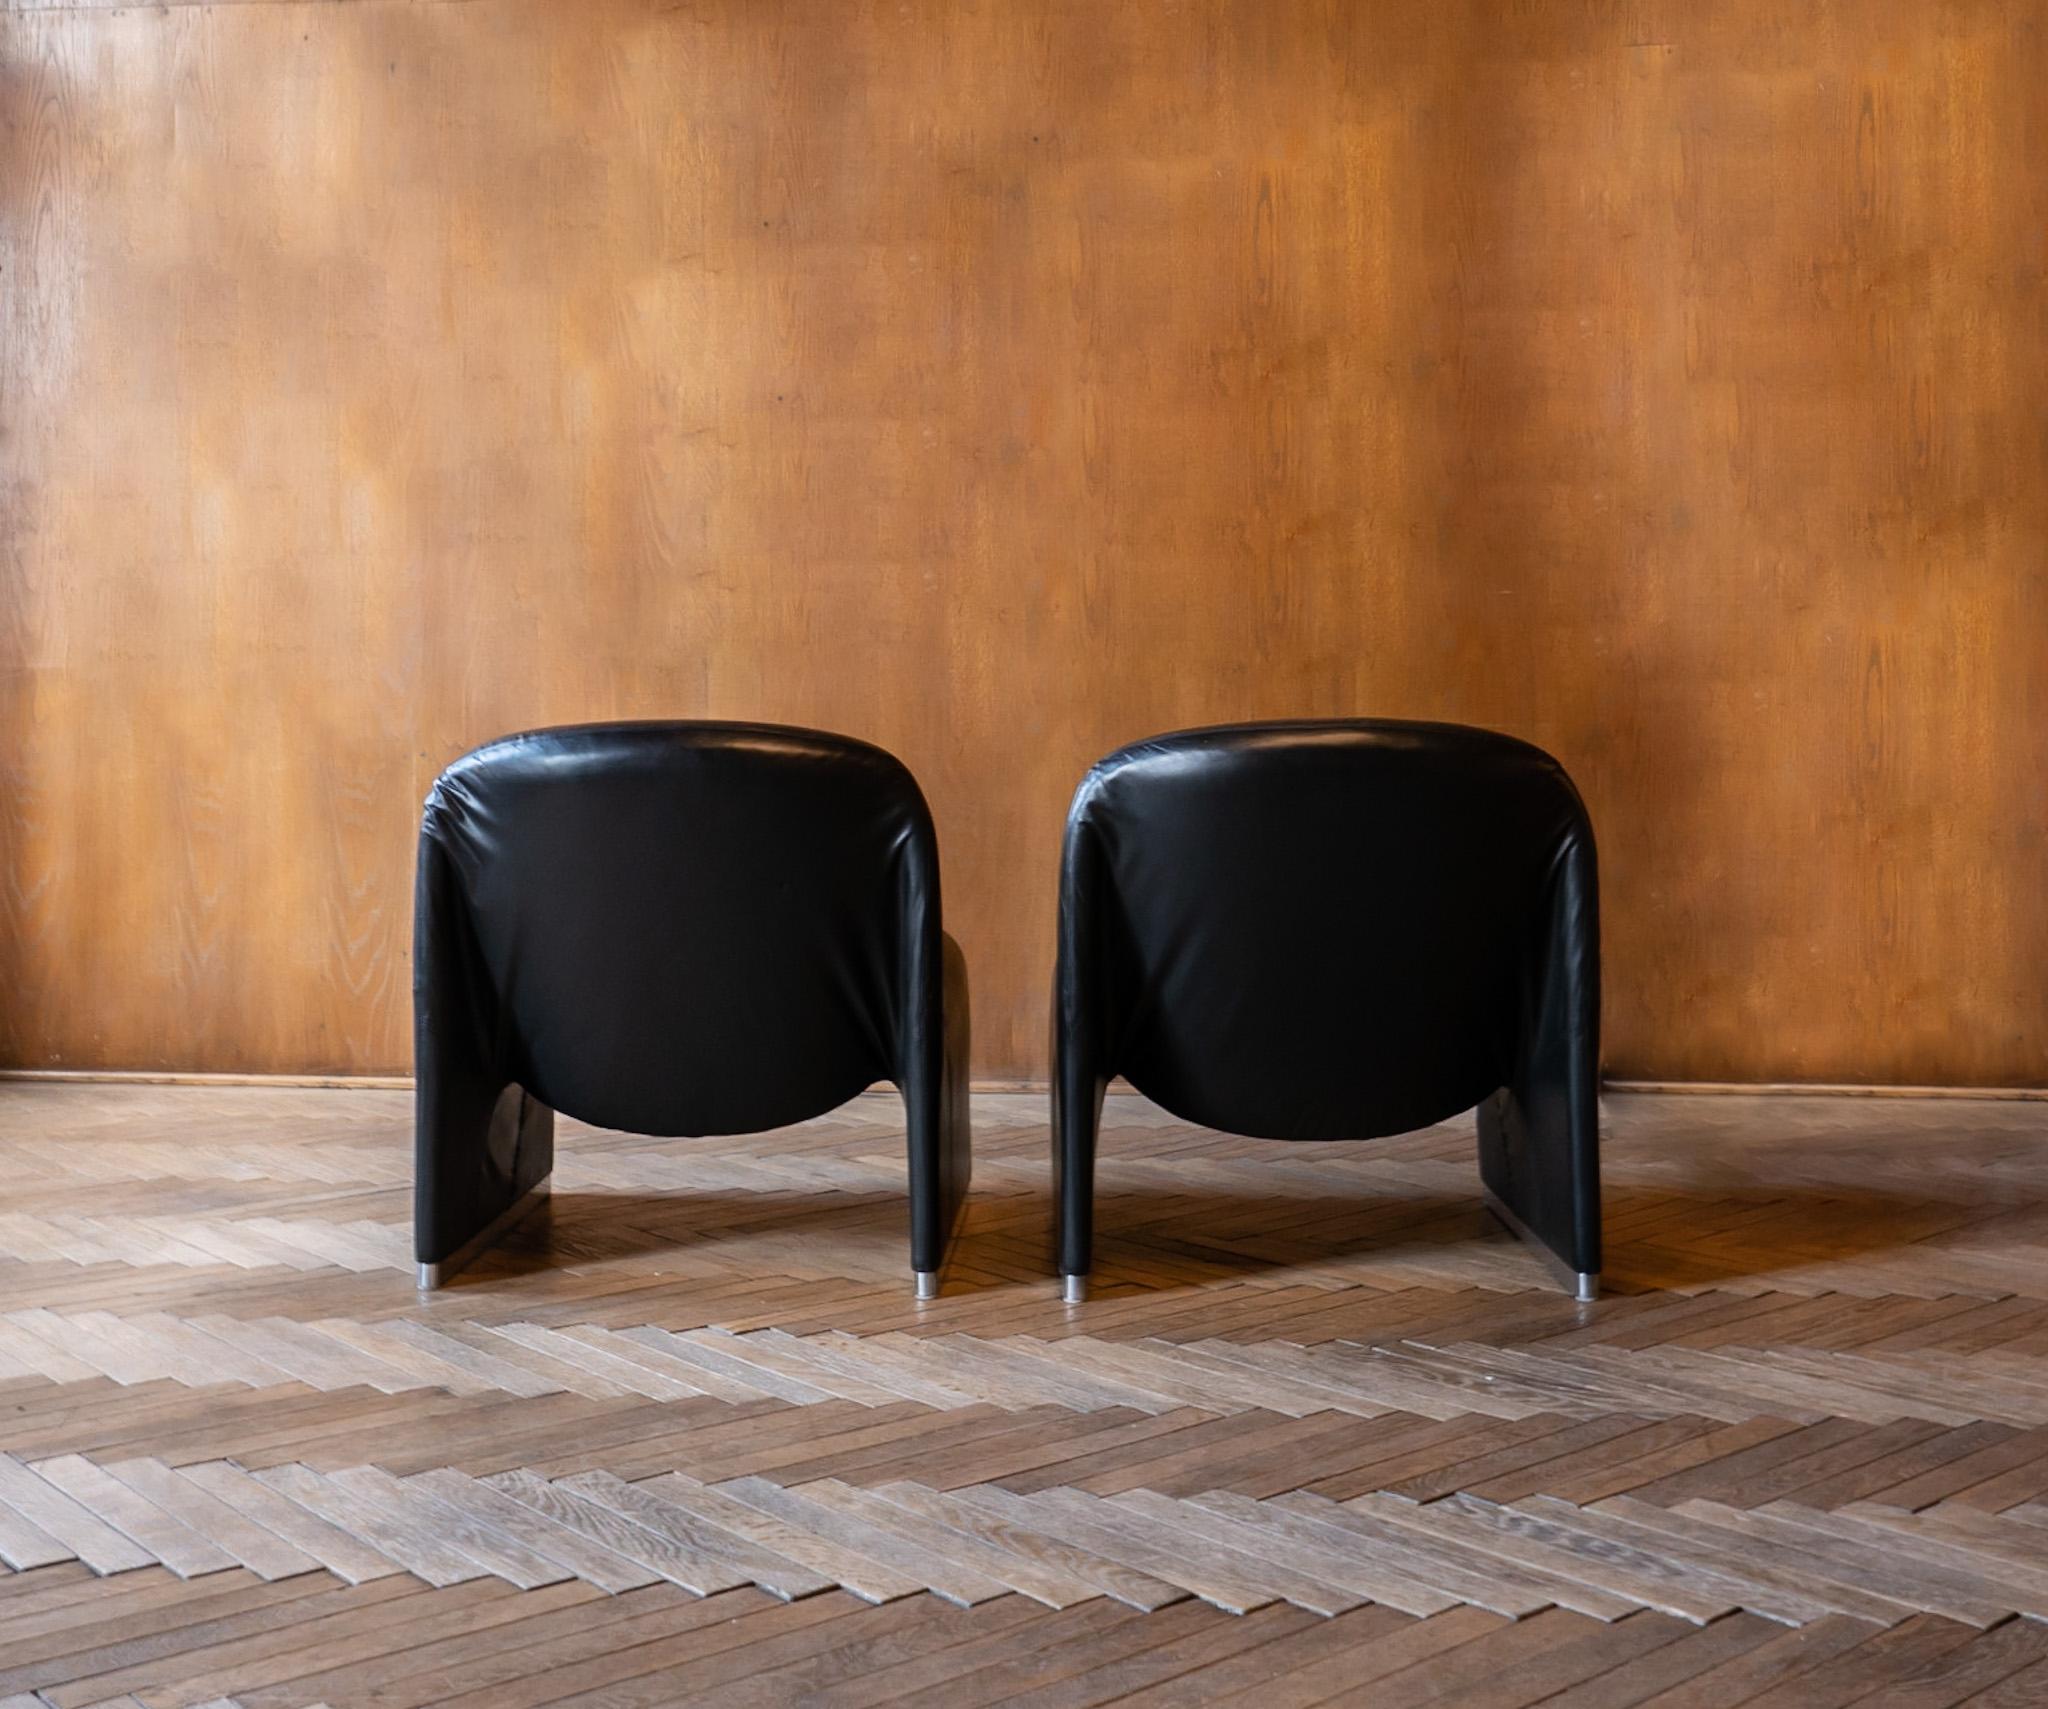 Aluminum Mid-Century Modern Black Leather Alky Chairs 2 by Giancarlo Piretti, Italy 1970s